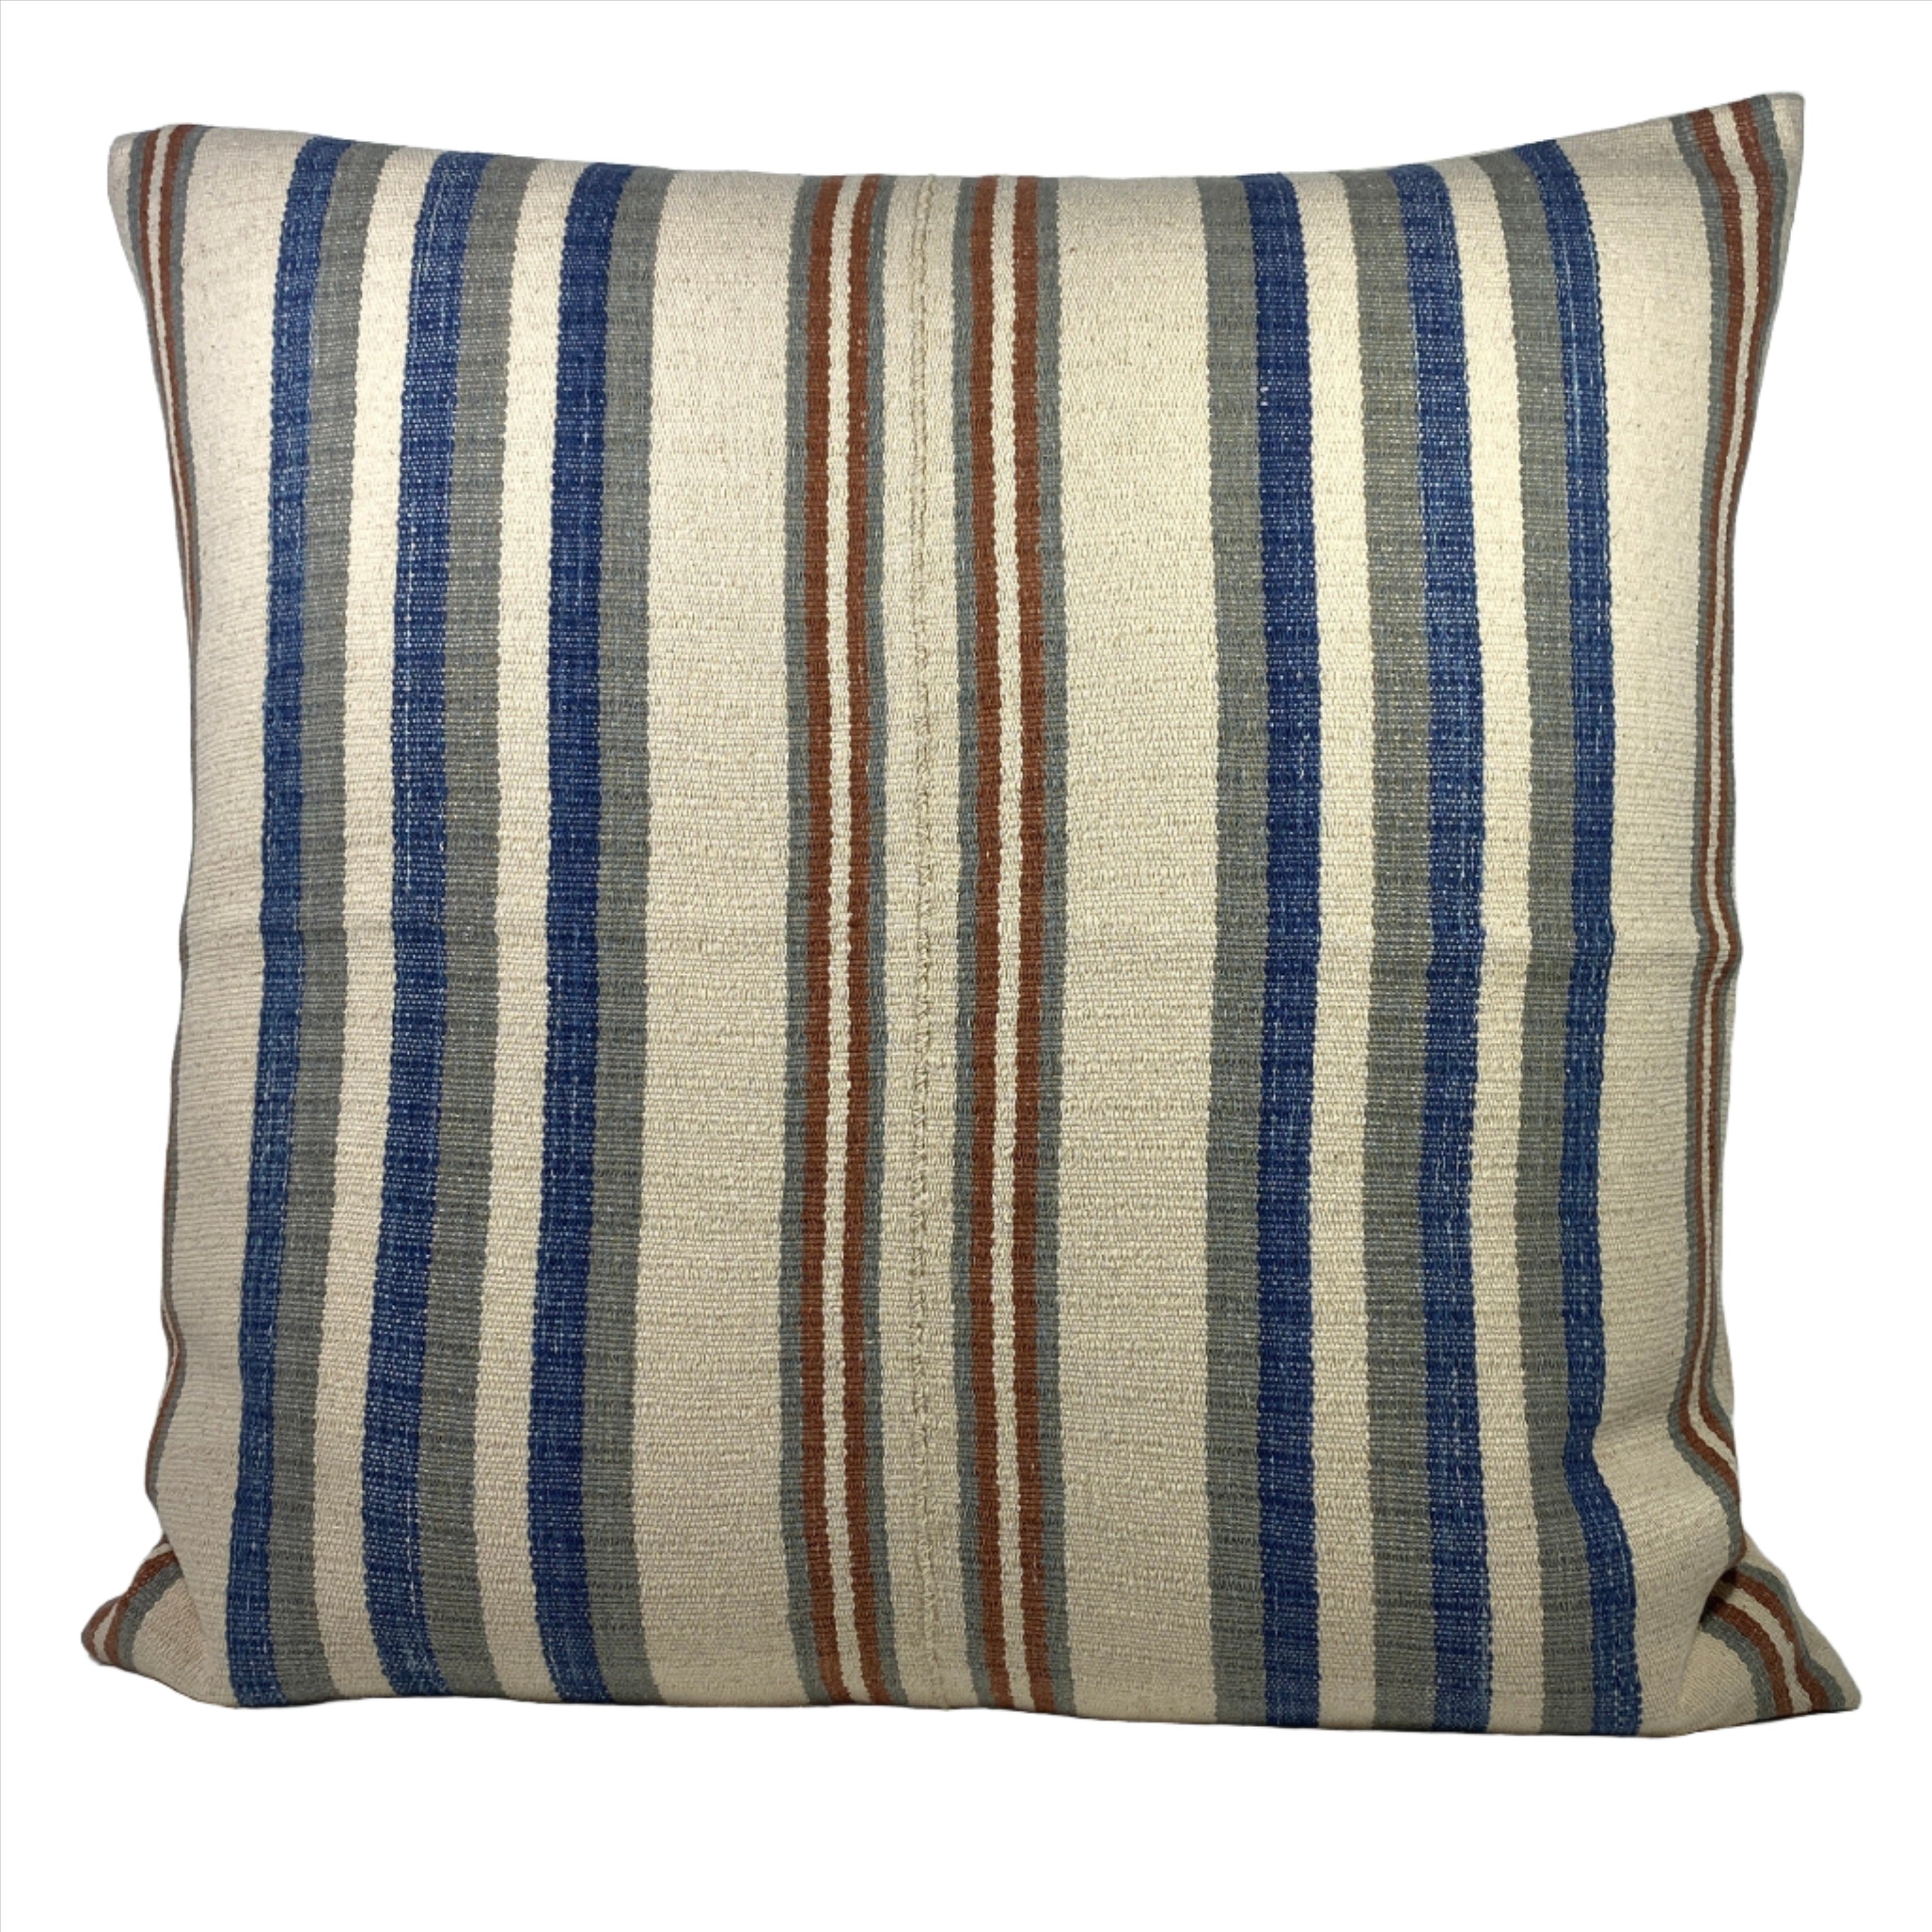 handwoven striped pillow in natural, grey, blue and rust